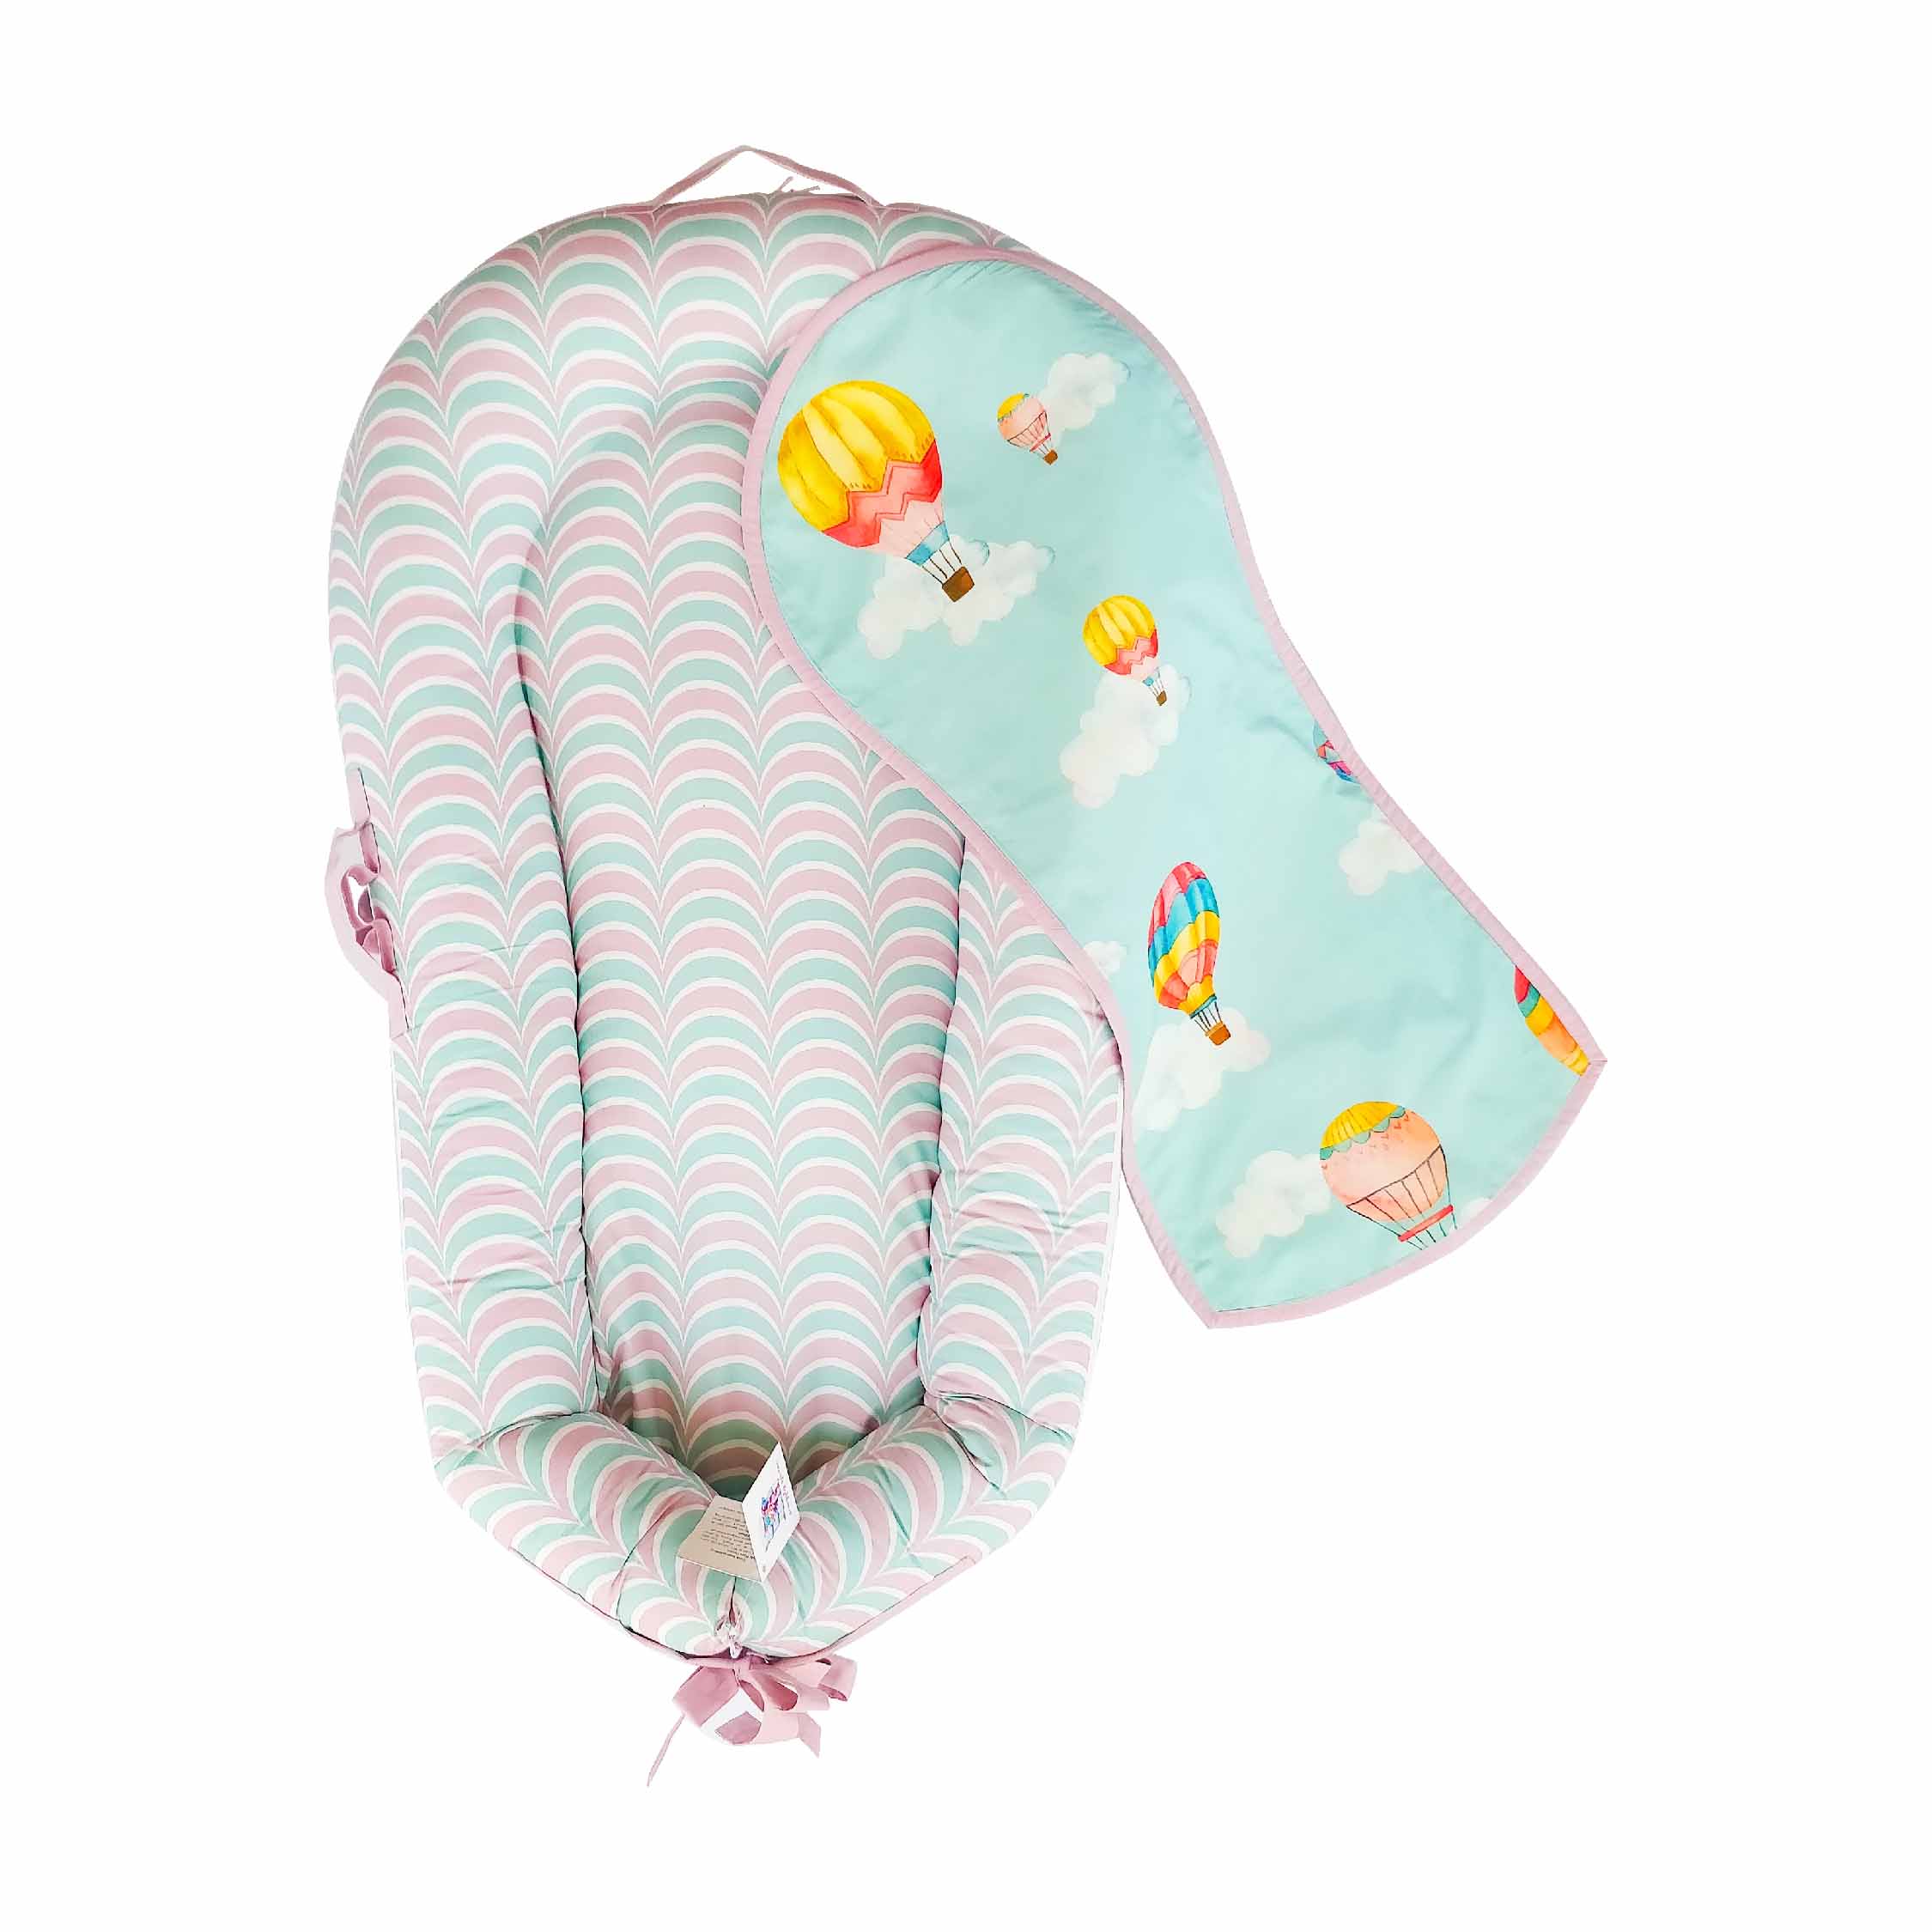 Cappadocia Hot Air Balloon - Snuggly Nest With Attachments - Mint Green